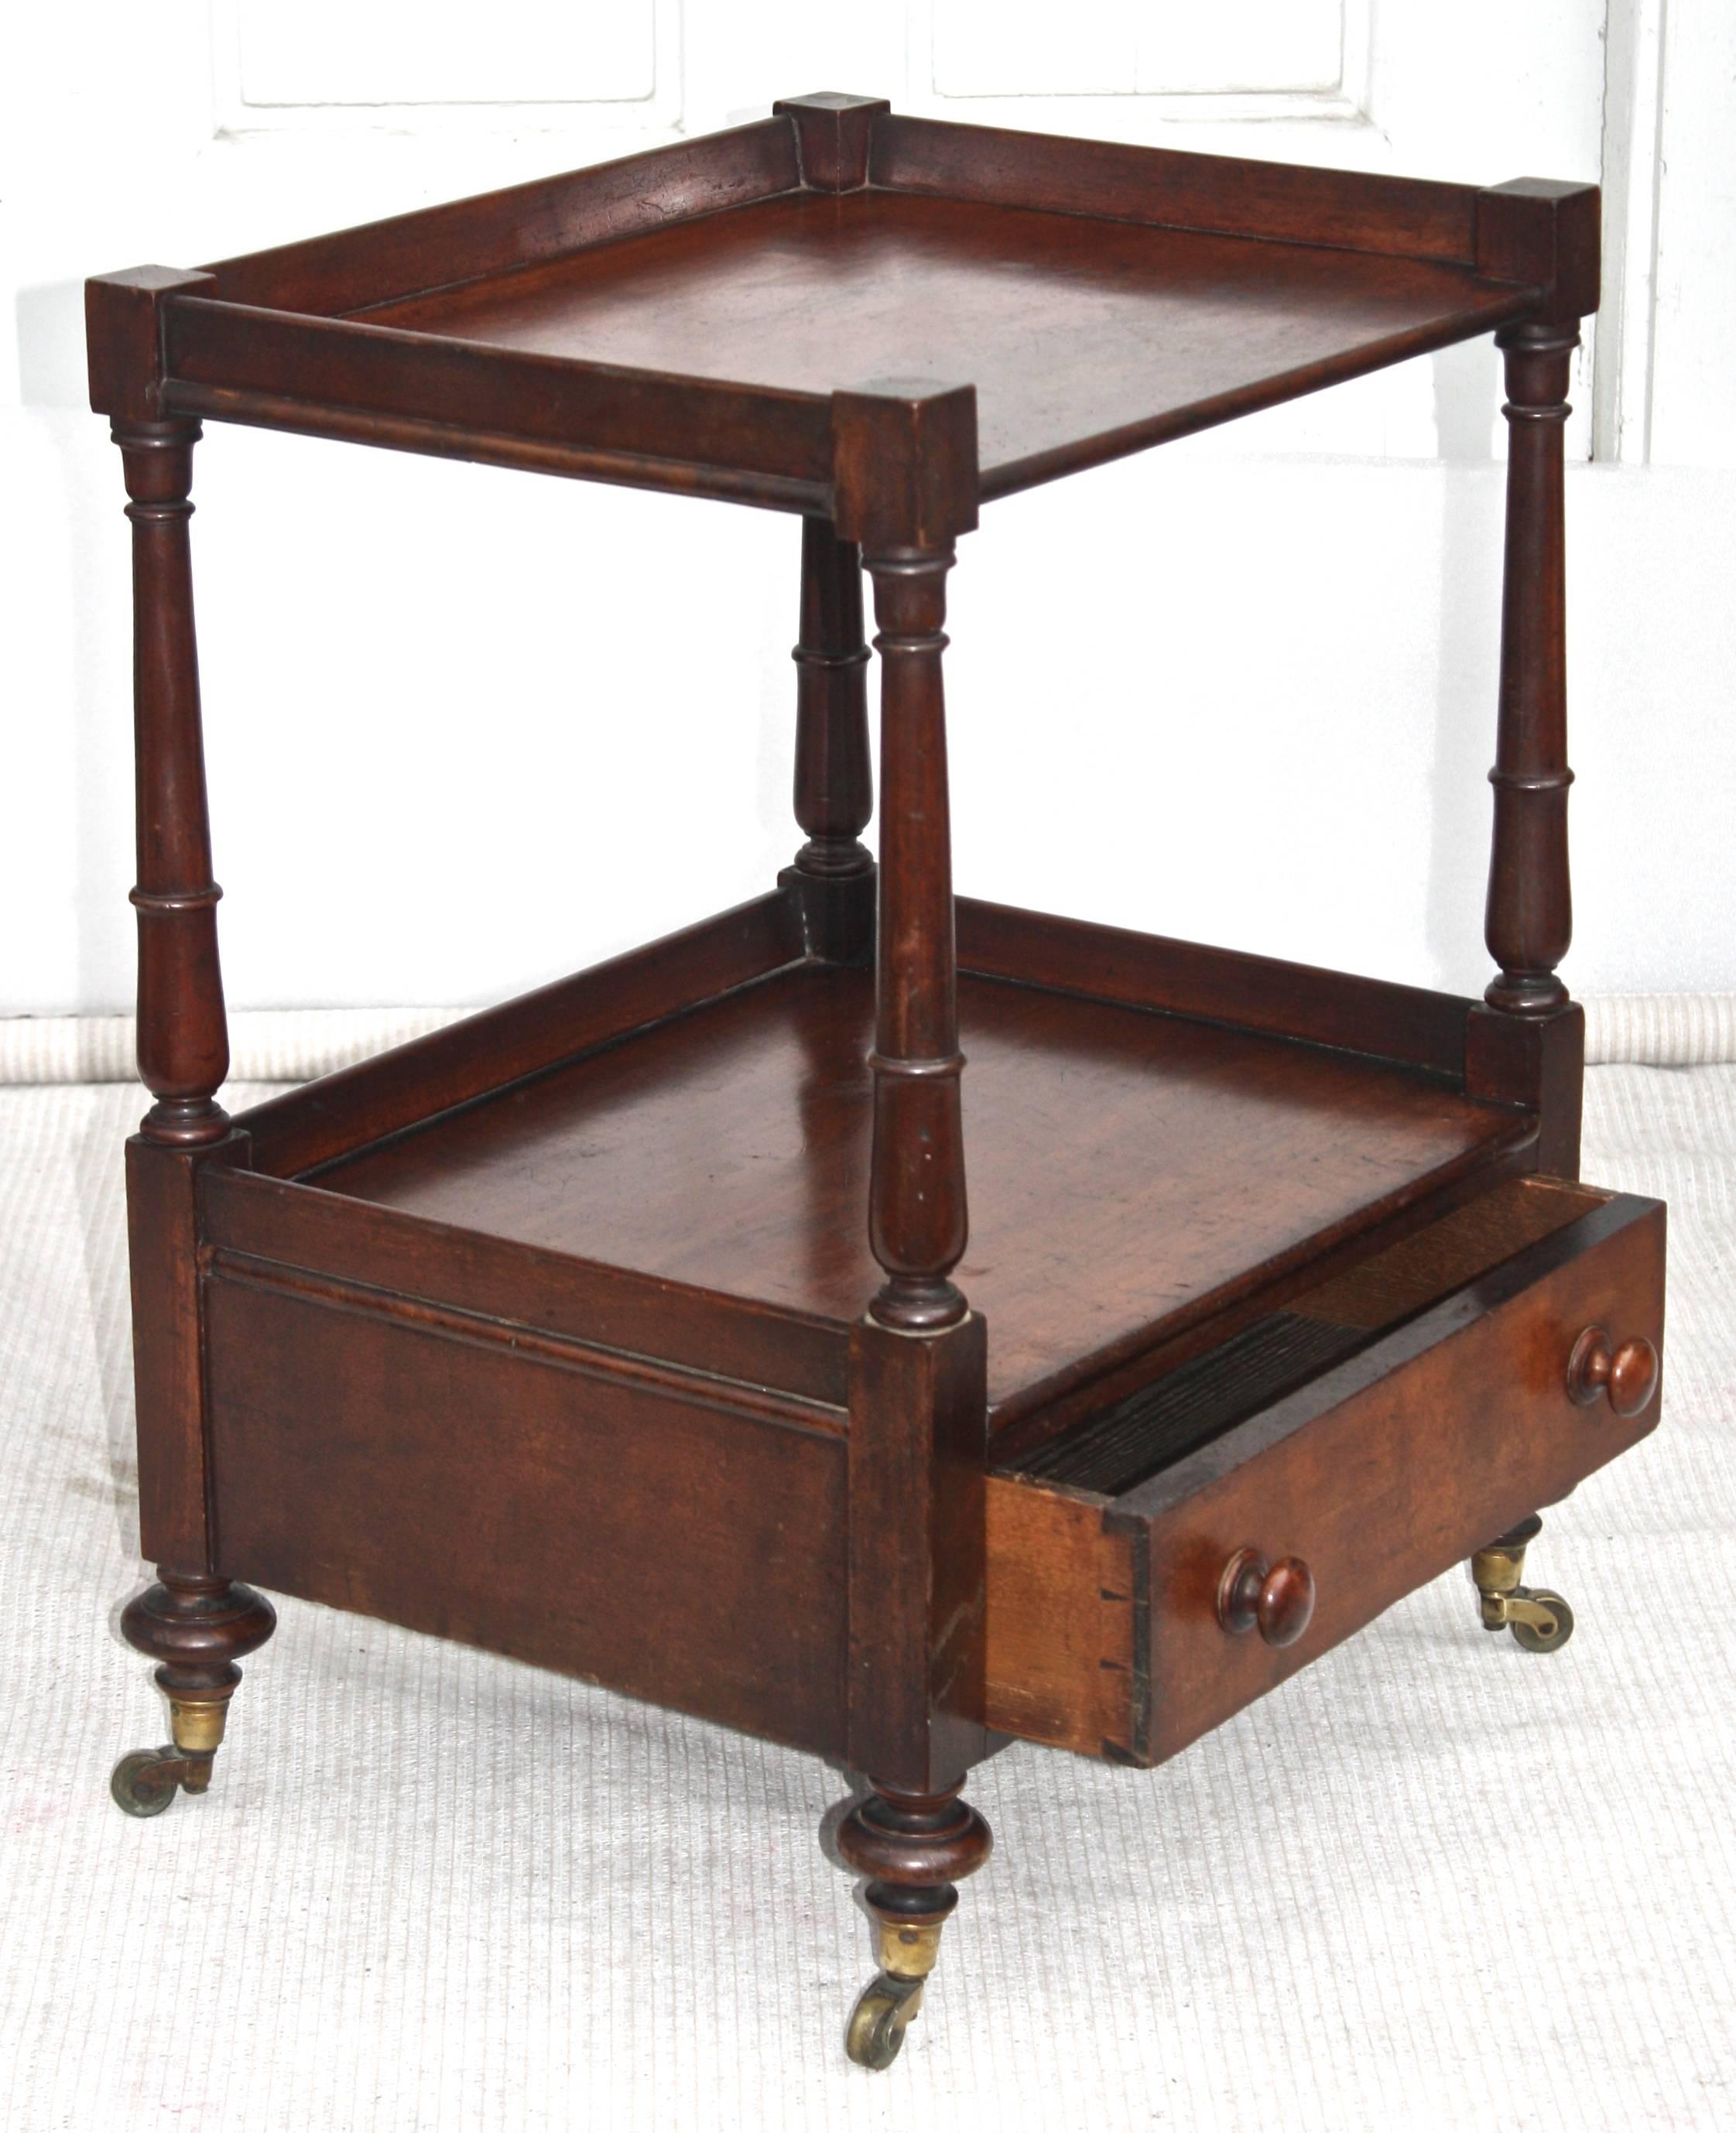 A very rare and highly unusual Regency period 'short' dumbwaiter table with drawer. Hand planed and turned mahogany, on brass castered small bun feet. 'Bespoke' for table-side wine and liquor service, it may be re-purposed aside upholstered lounge